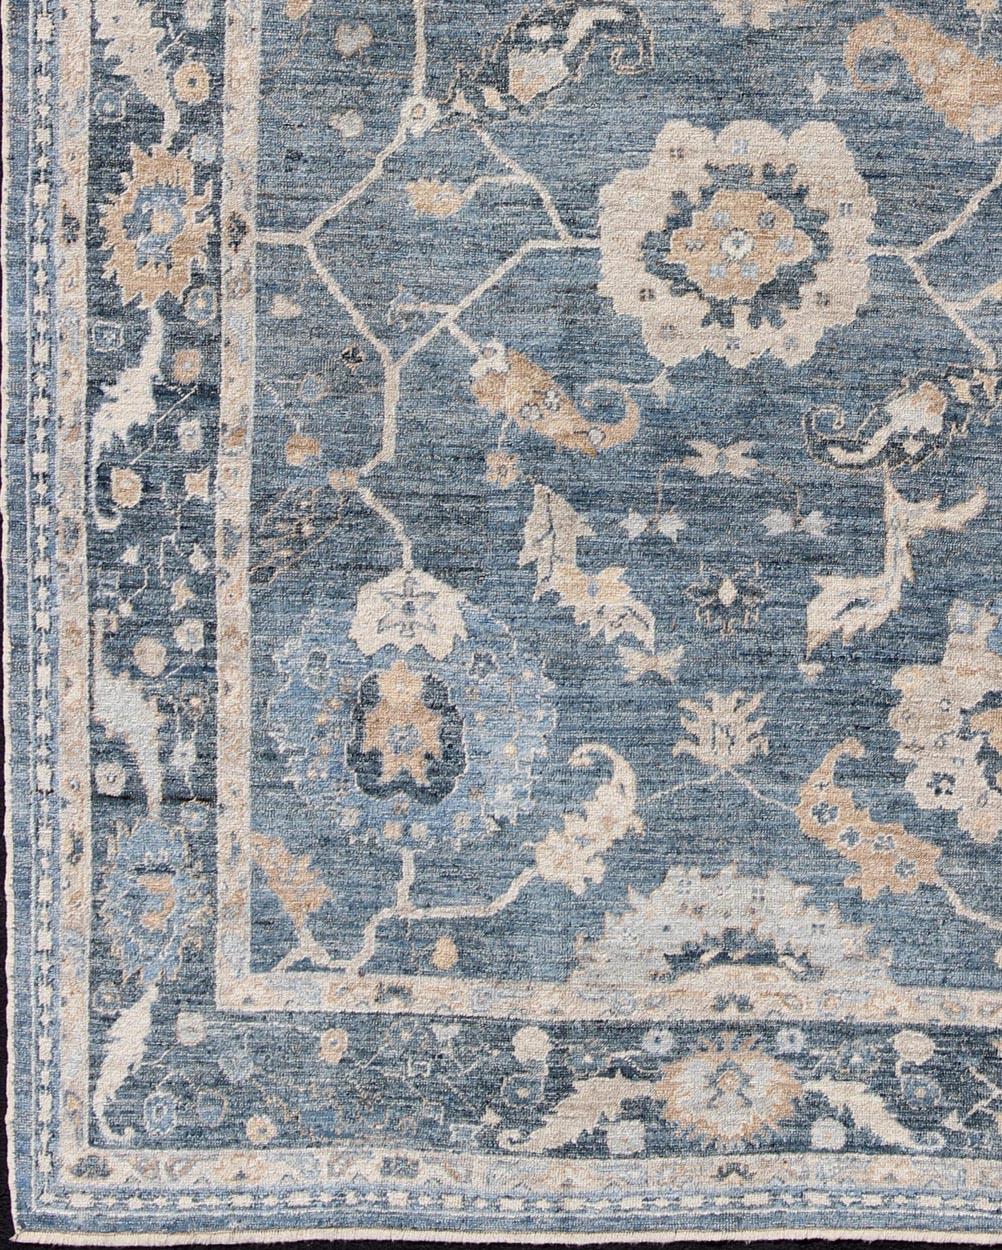 Shades of blue and tan angora Oushak rug from Turkey, rug an-134599, country of origin / type: Turkey / Angora Oushak

From our Angora collection, this piece is made with a combination of angora and old wool. Featuring all organic materials, the